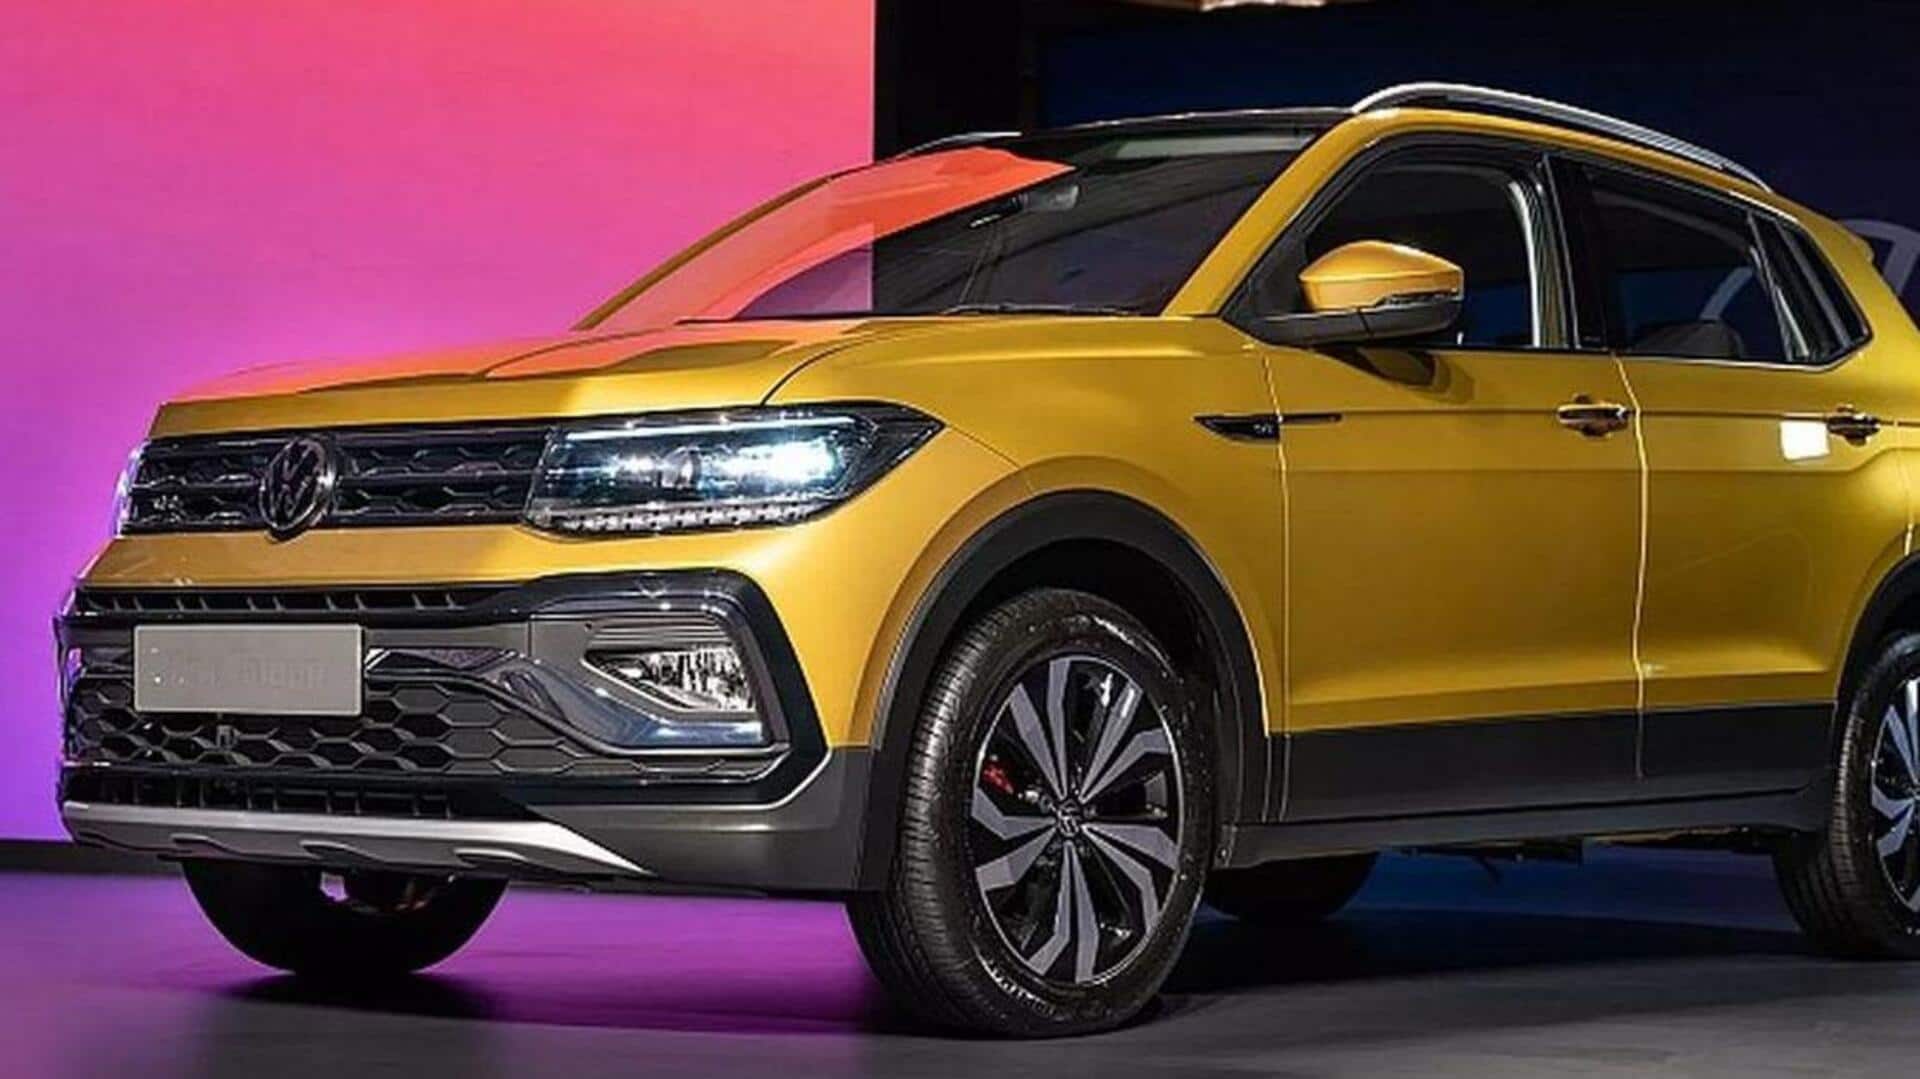 Volkswagen's sub-4-meter SUV in the works for Indian market